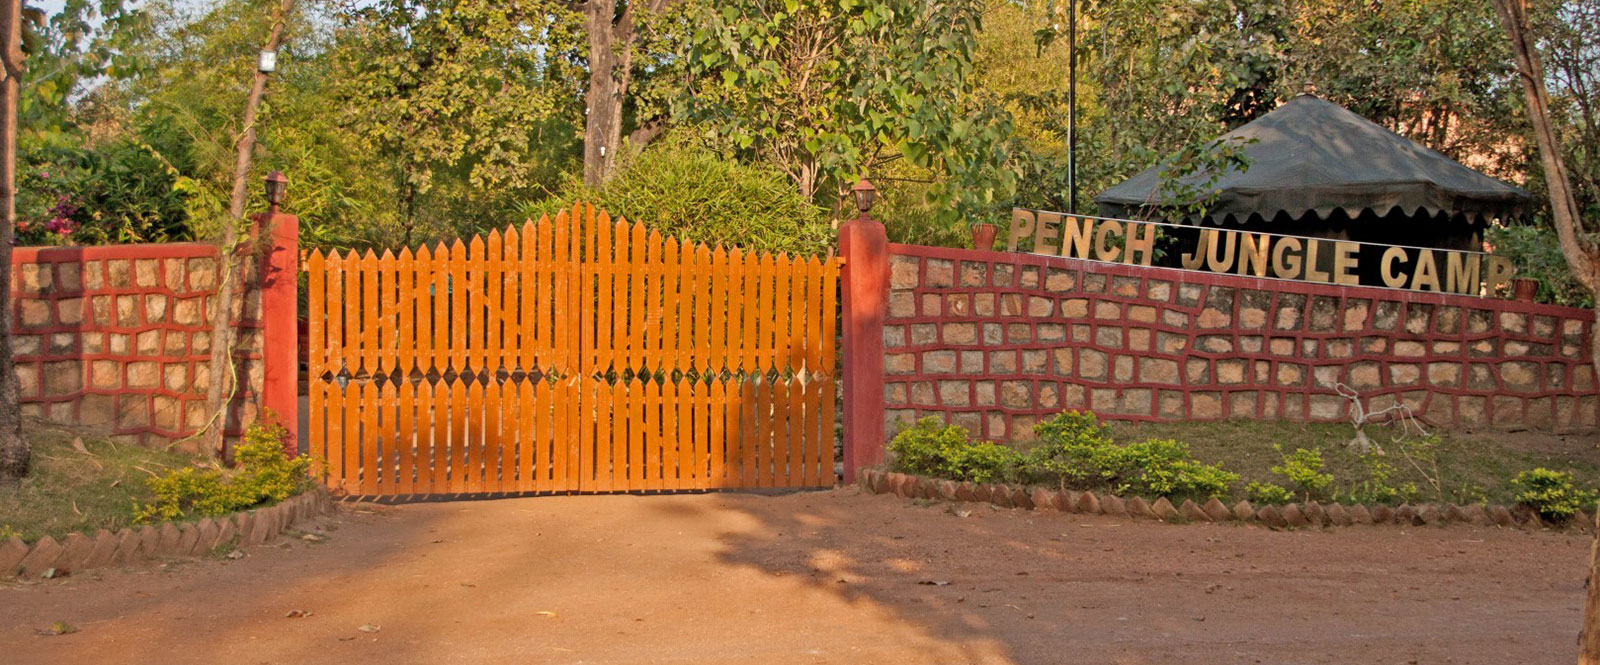 Hotels in pench national park